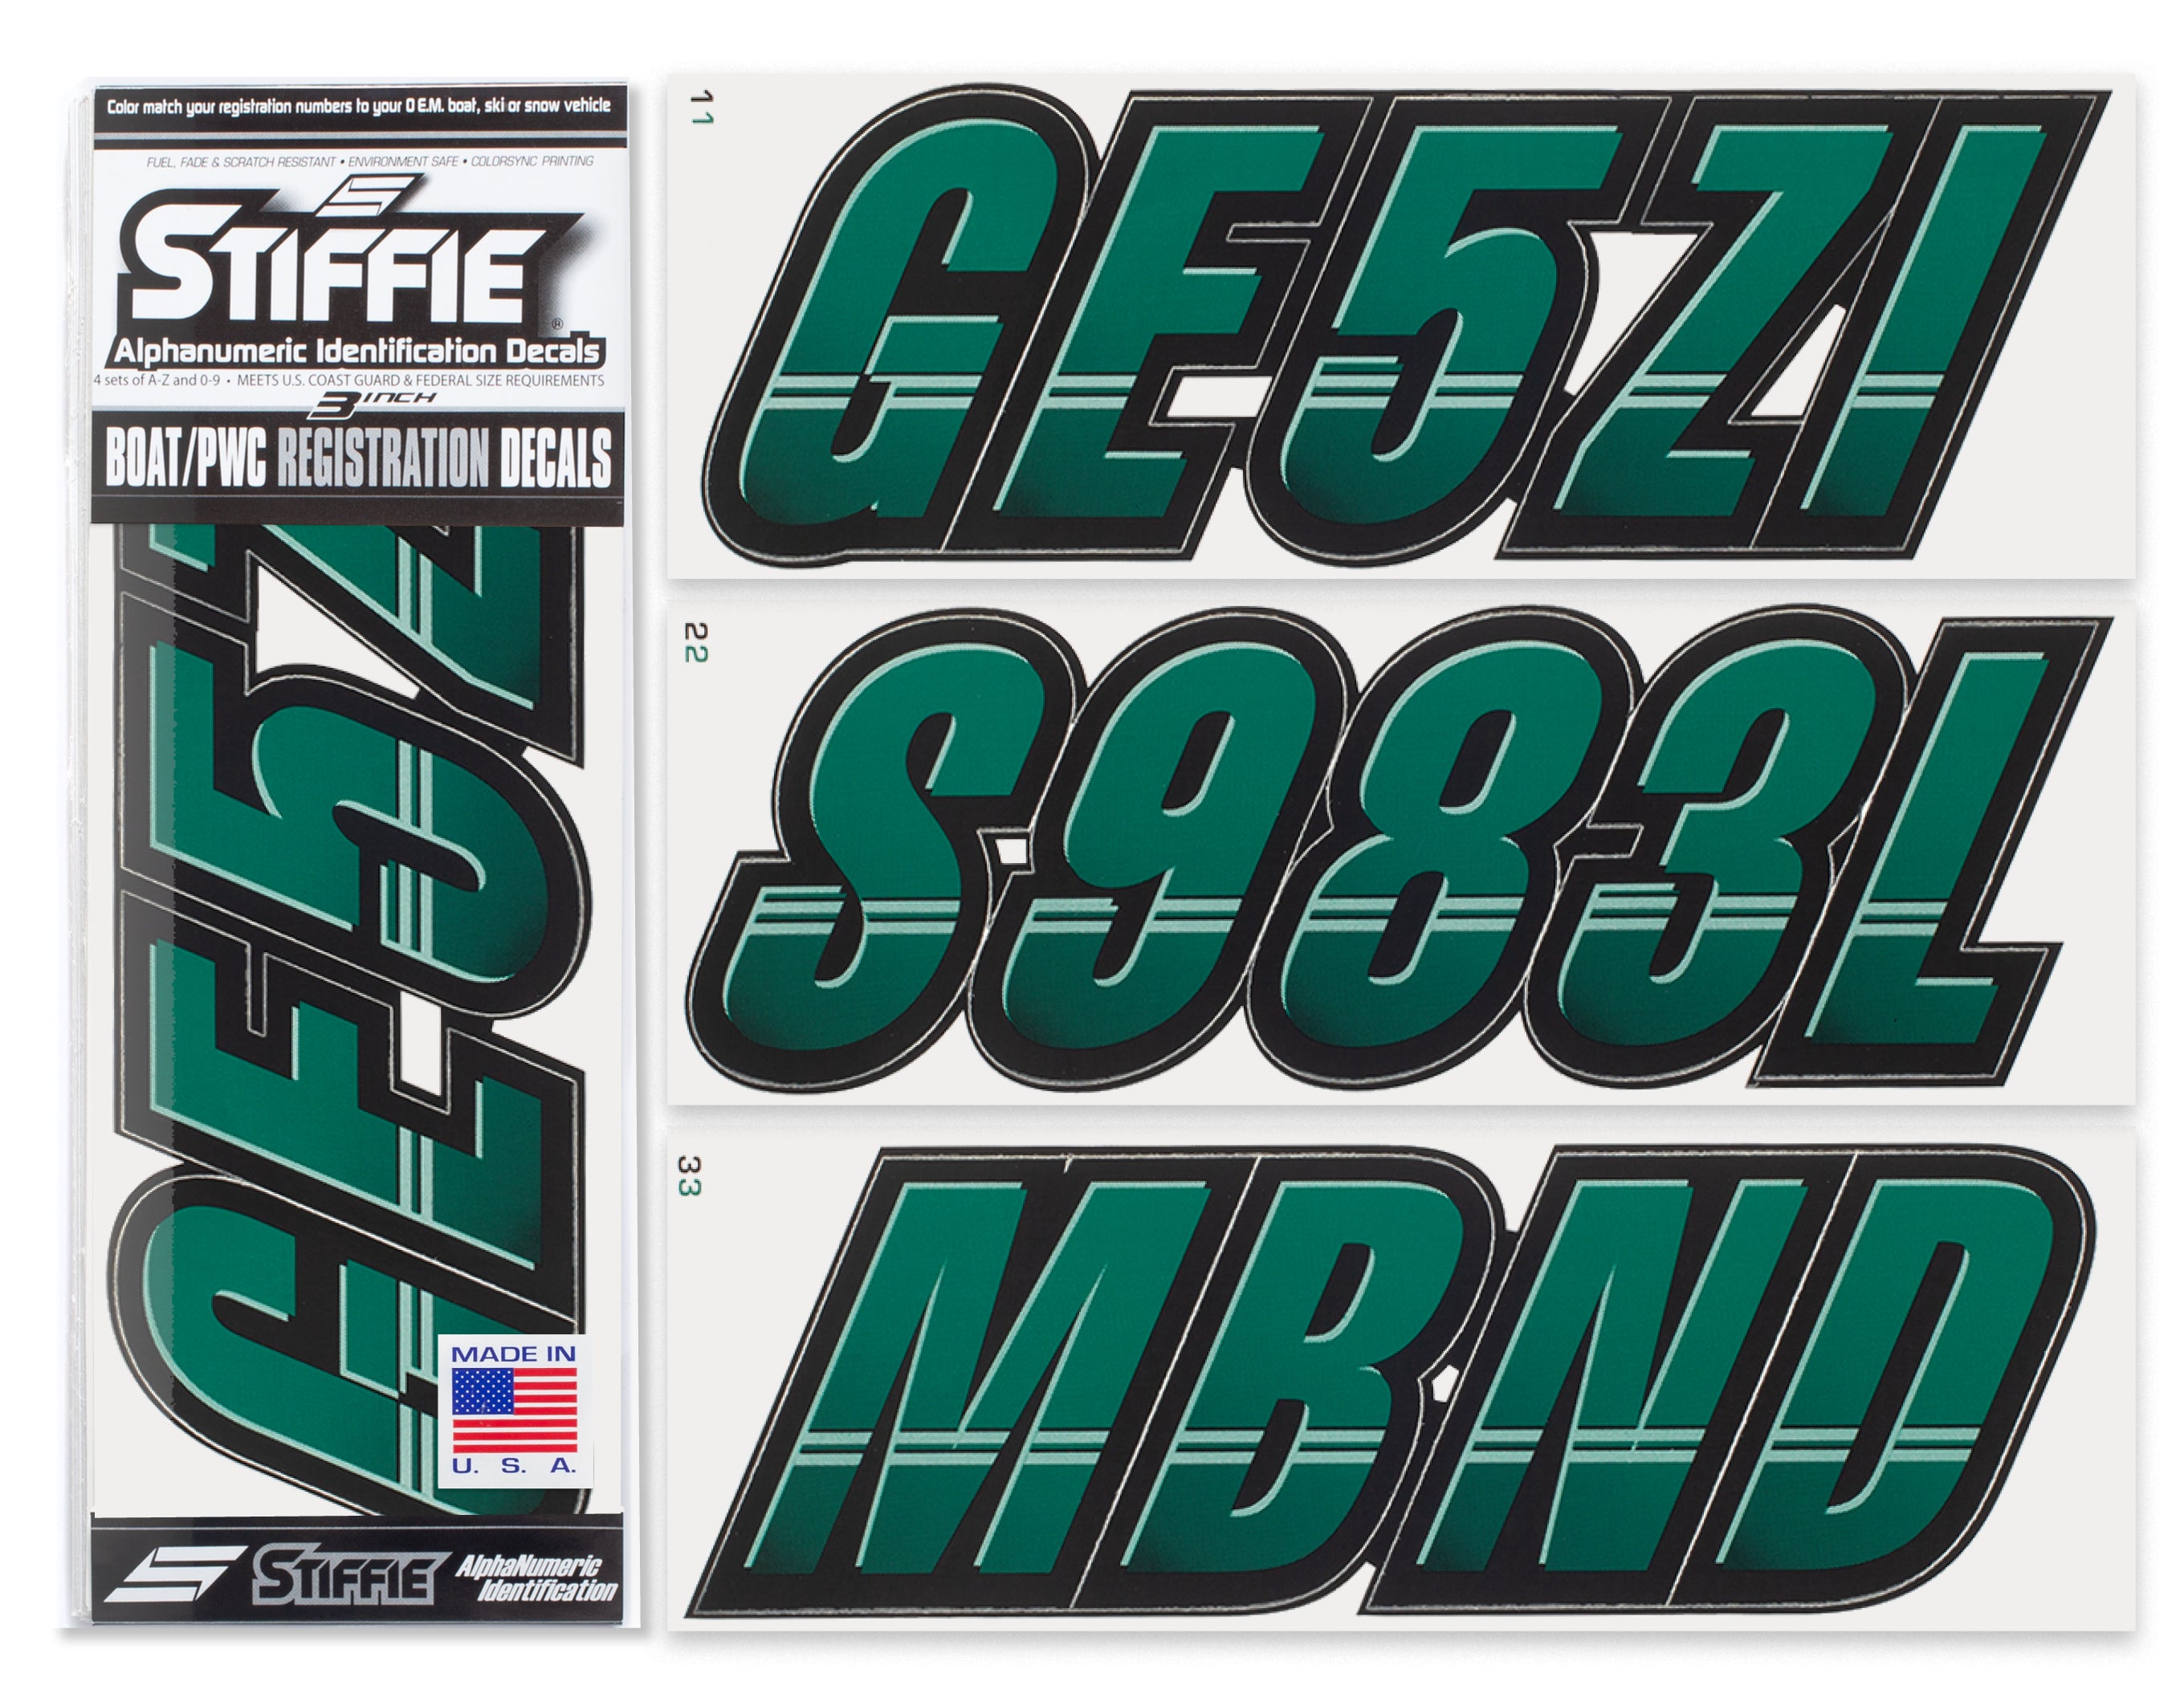 STIFFIE Techtron Racing Green/Black 3" Alpha-Numeric Registration Identification Numbers Stickers Decals for Boats & Personal Watercraft